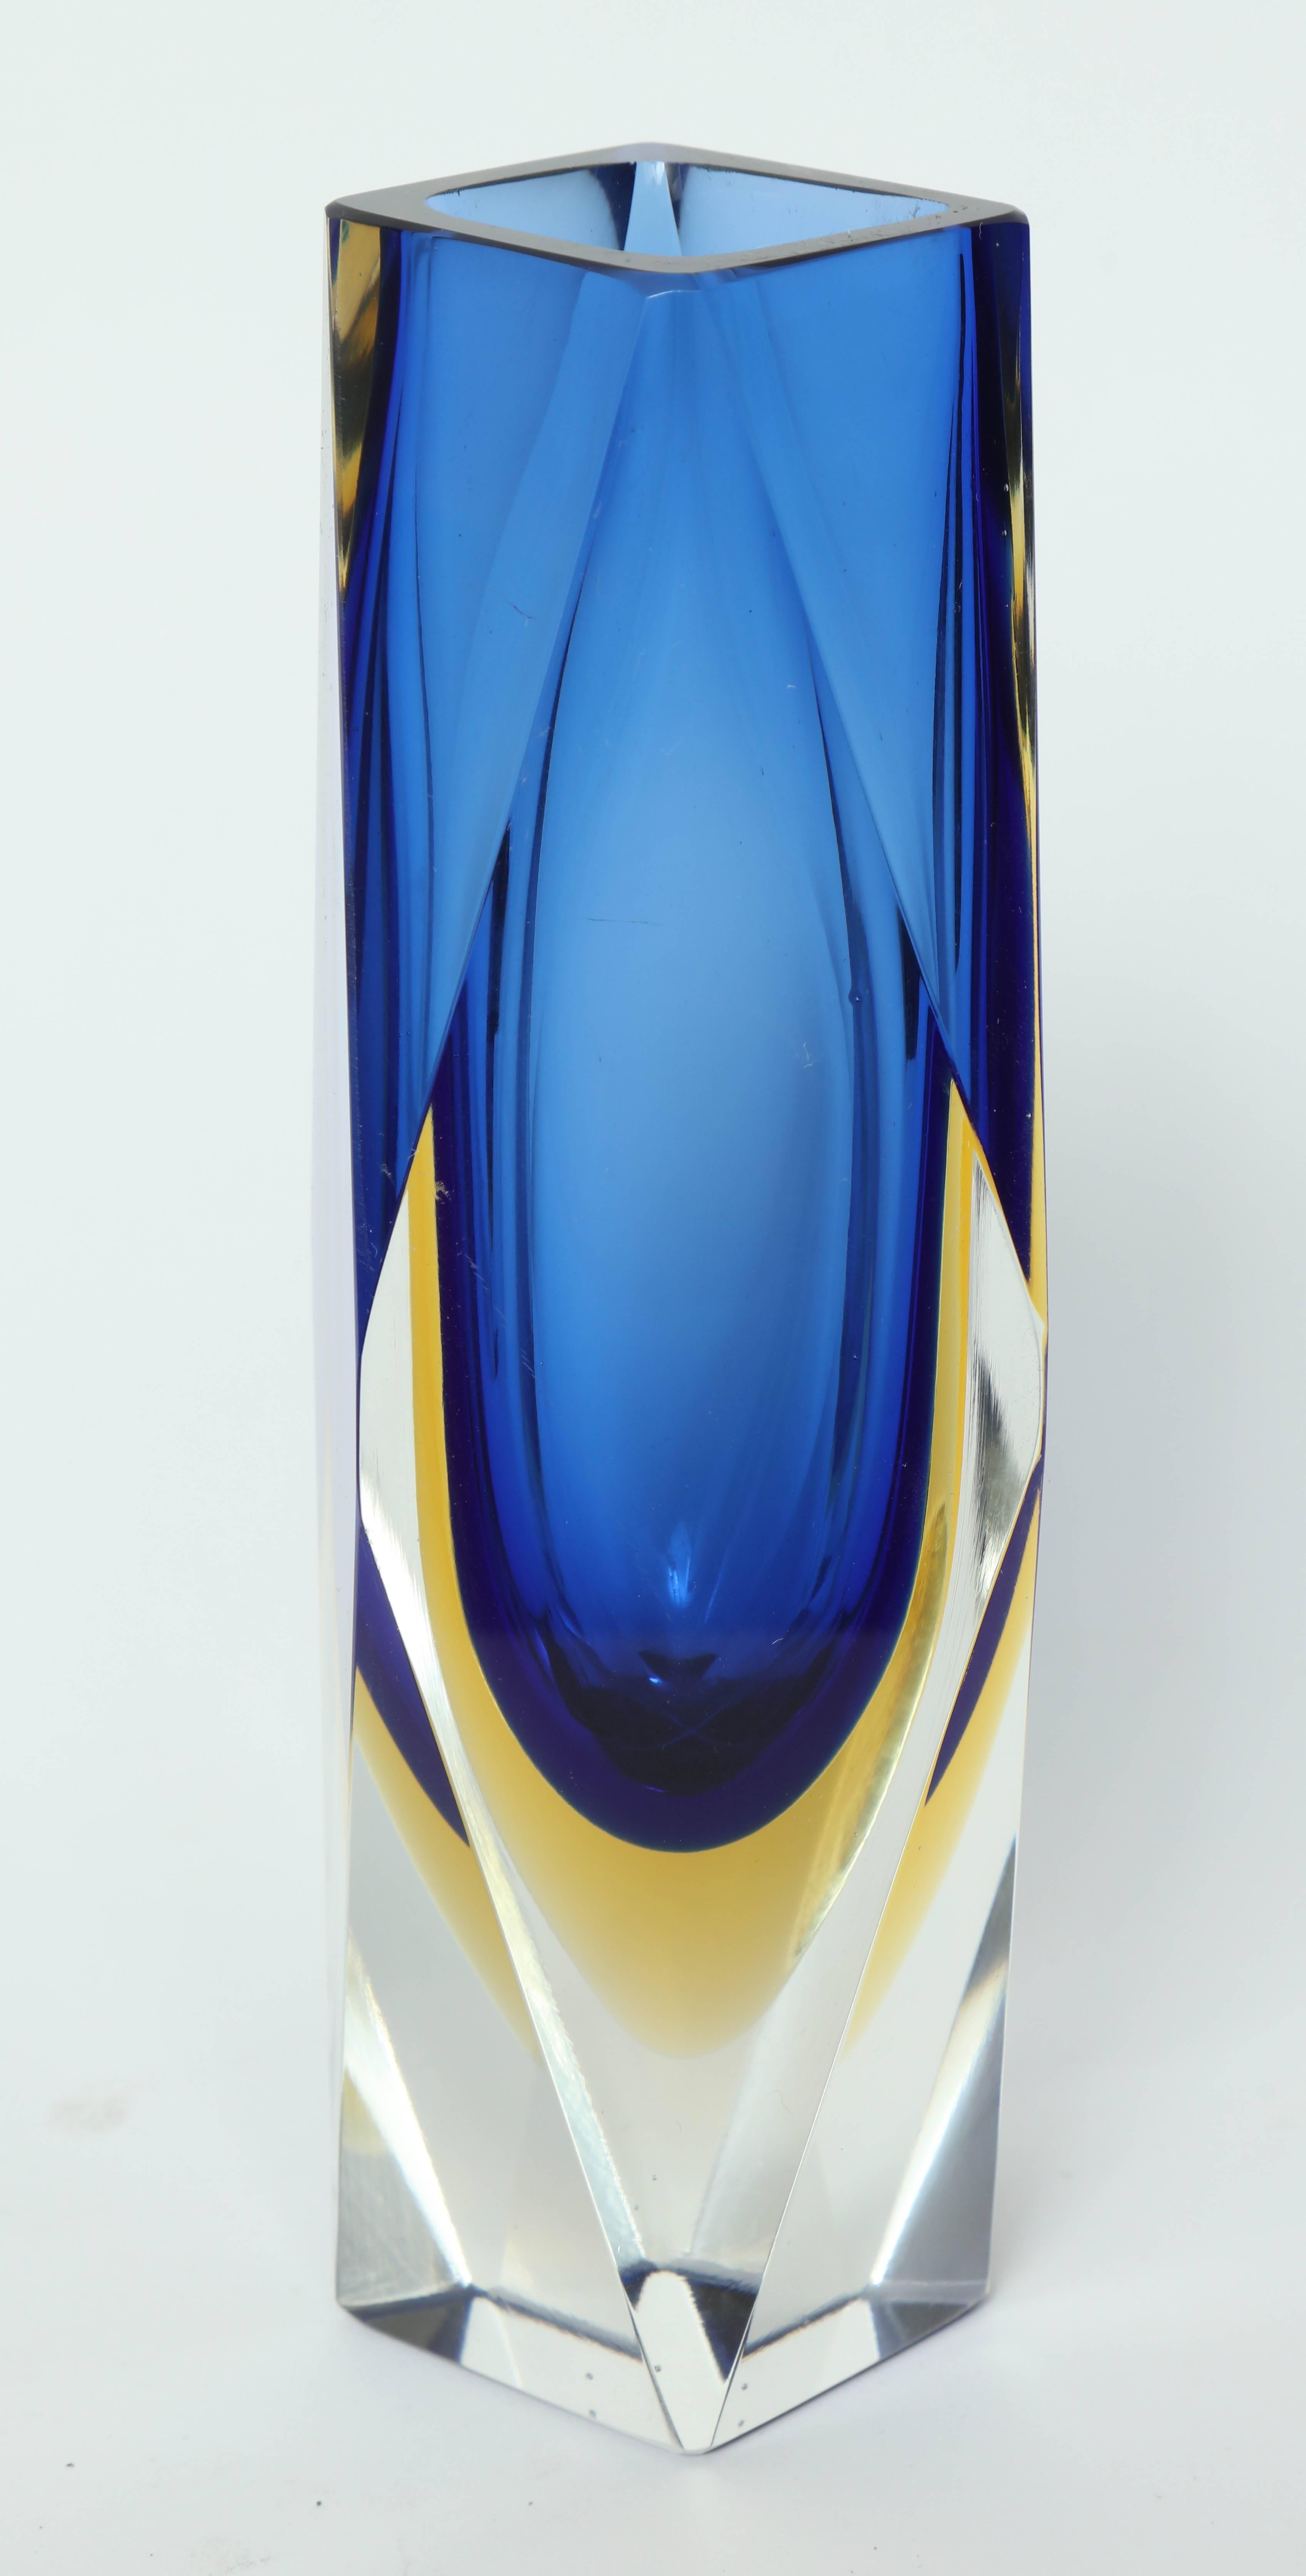 Italian Mid-Century faceted Murano glass vase in cobalt blue and amber yellow.
